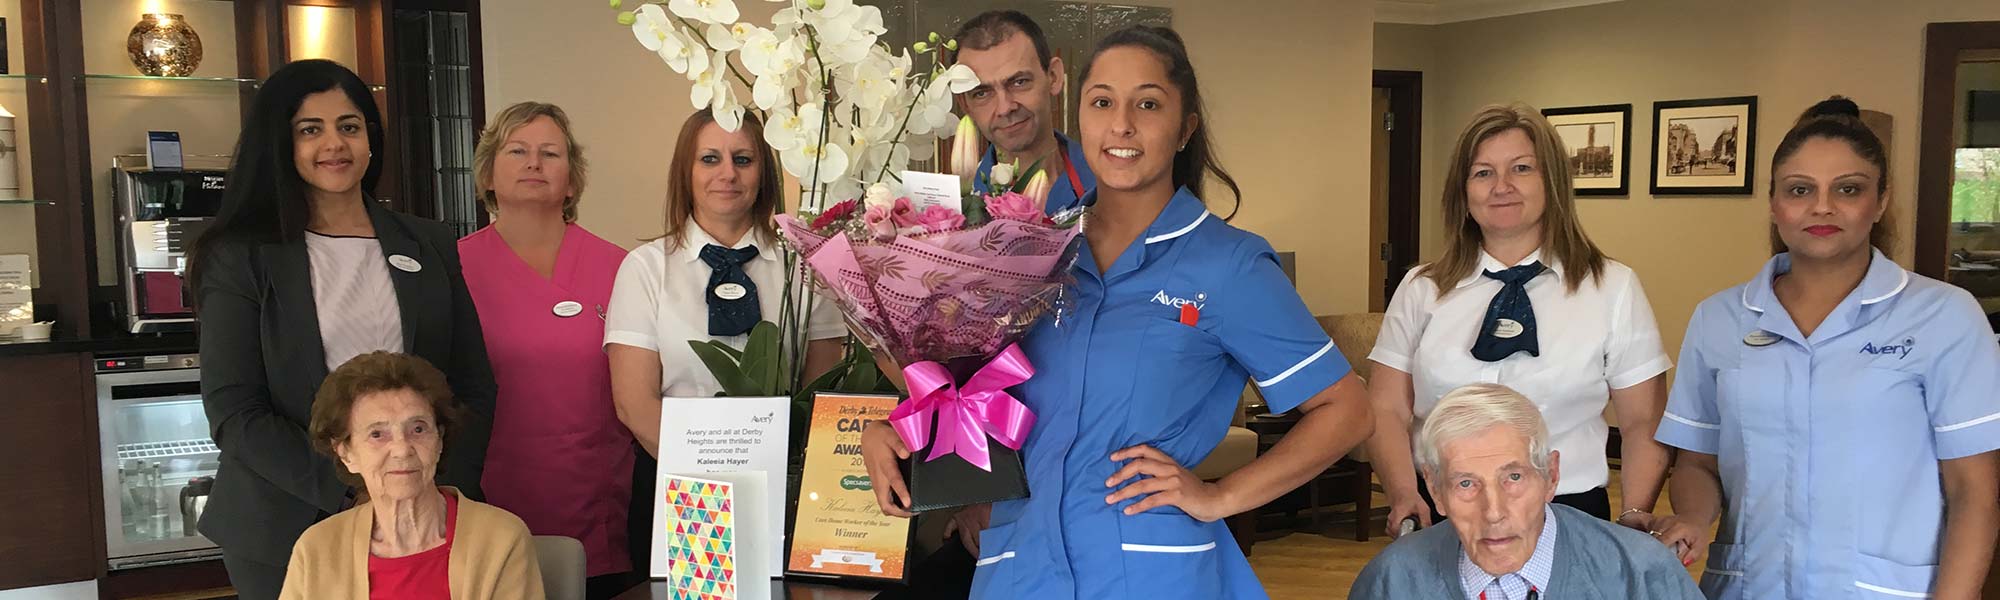 Kaleeia-receives-her-award-at-Derby-Heights-Care-Home-banner-image